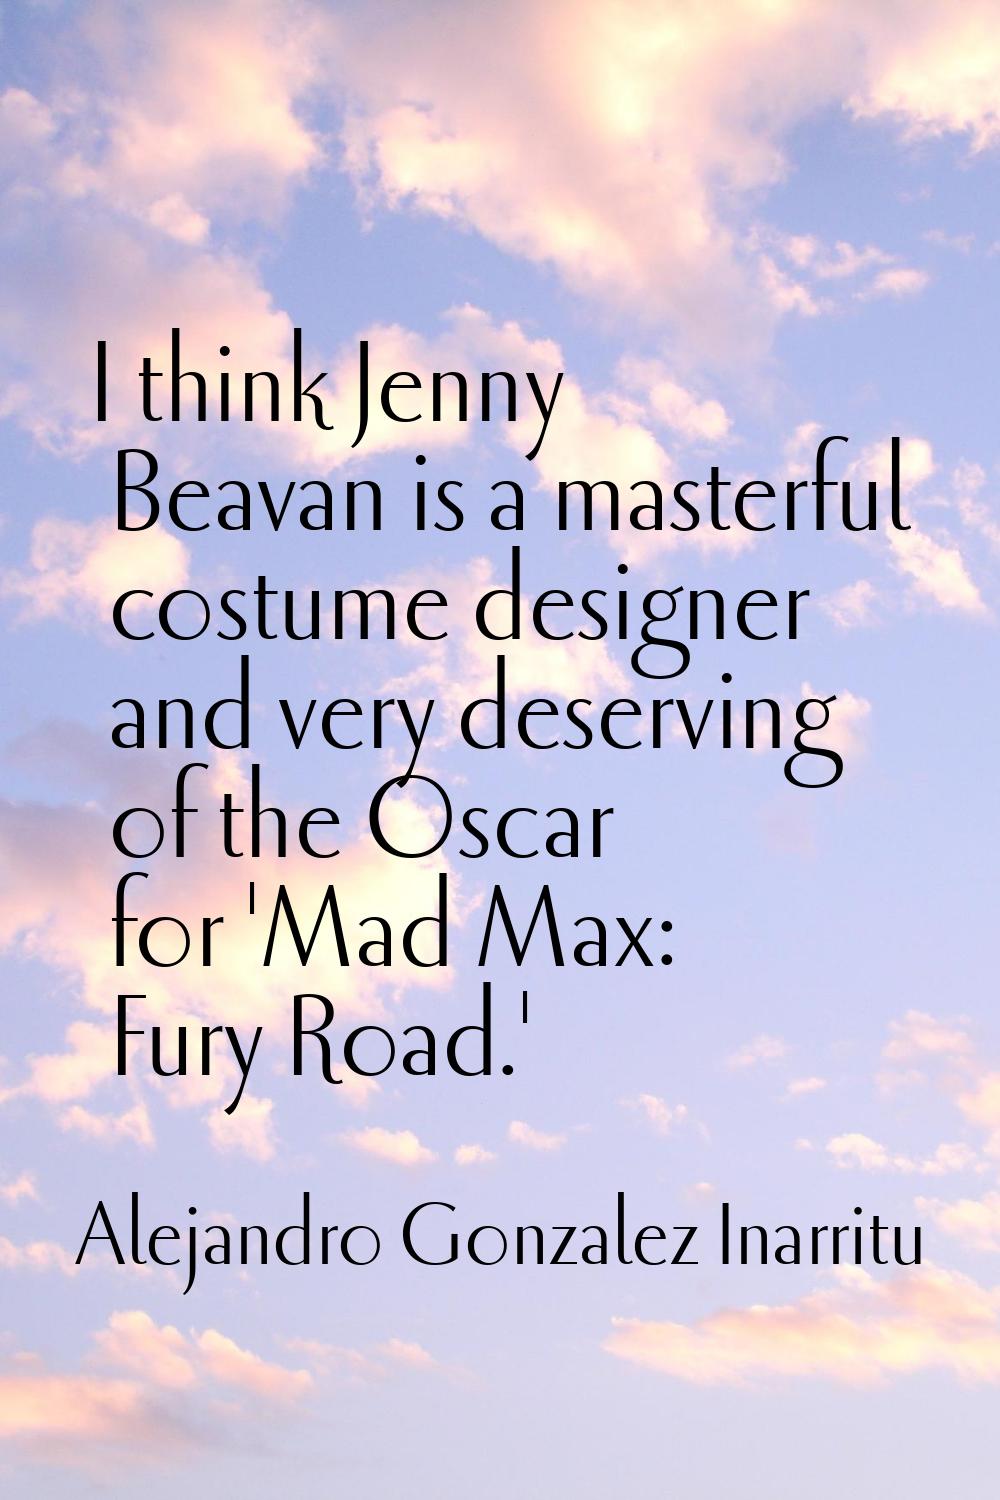 I think Jenny Beavan is a masterful costume designer and very deserving of the Oscar for 'Mad Max: 